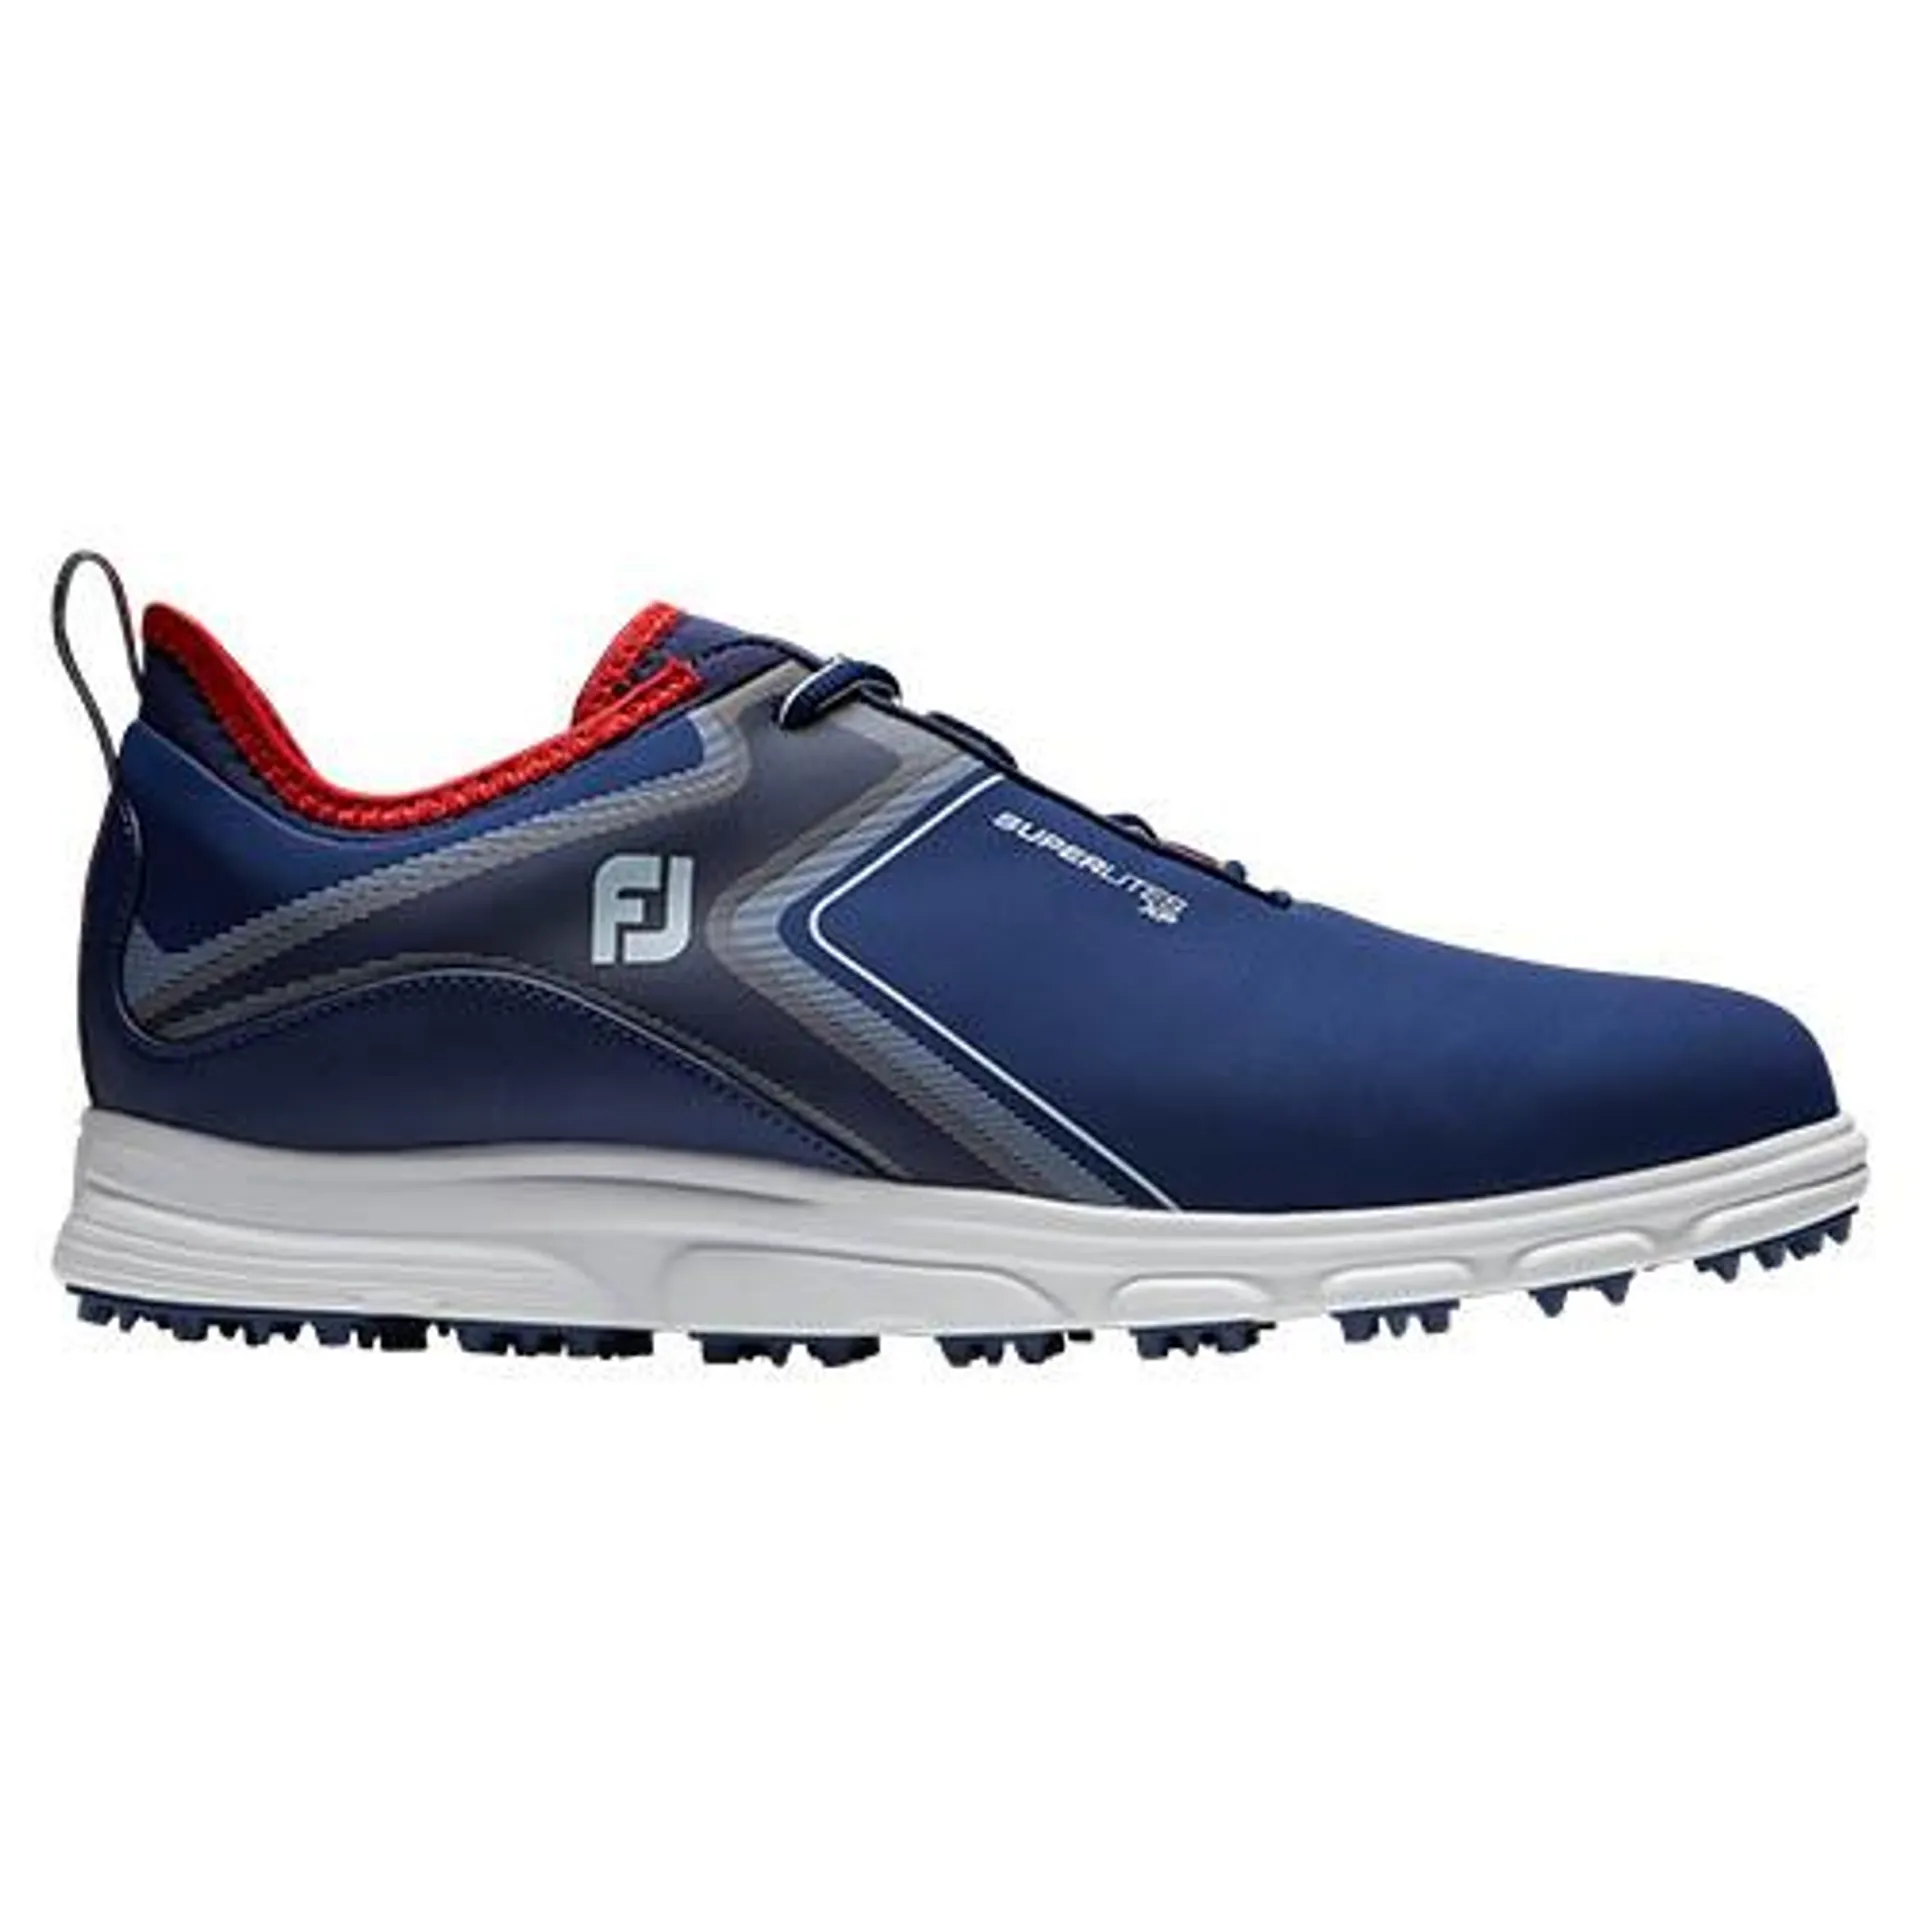 FootJoy Superlite Xp Golf Shoes – Navy/White/Red 58080